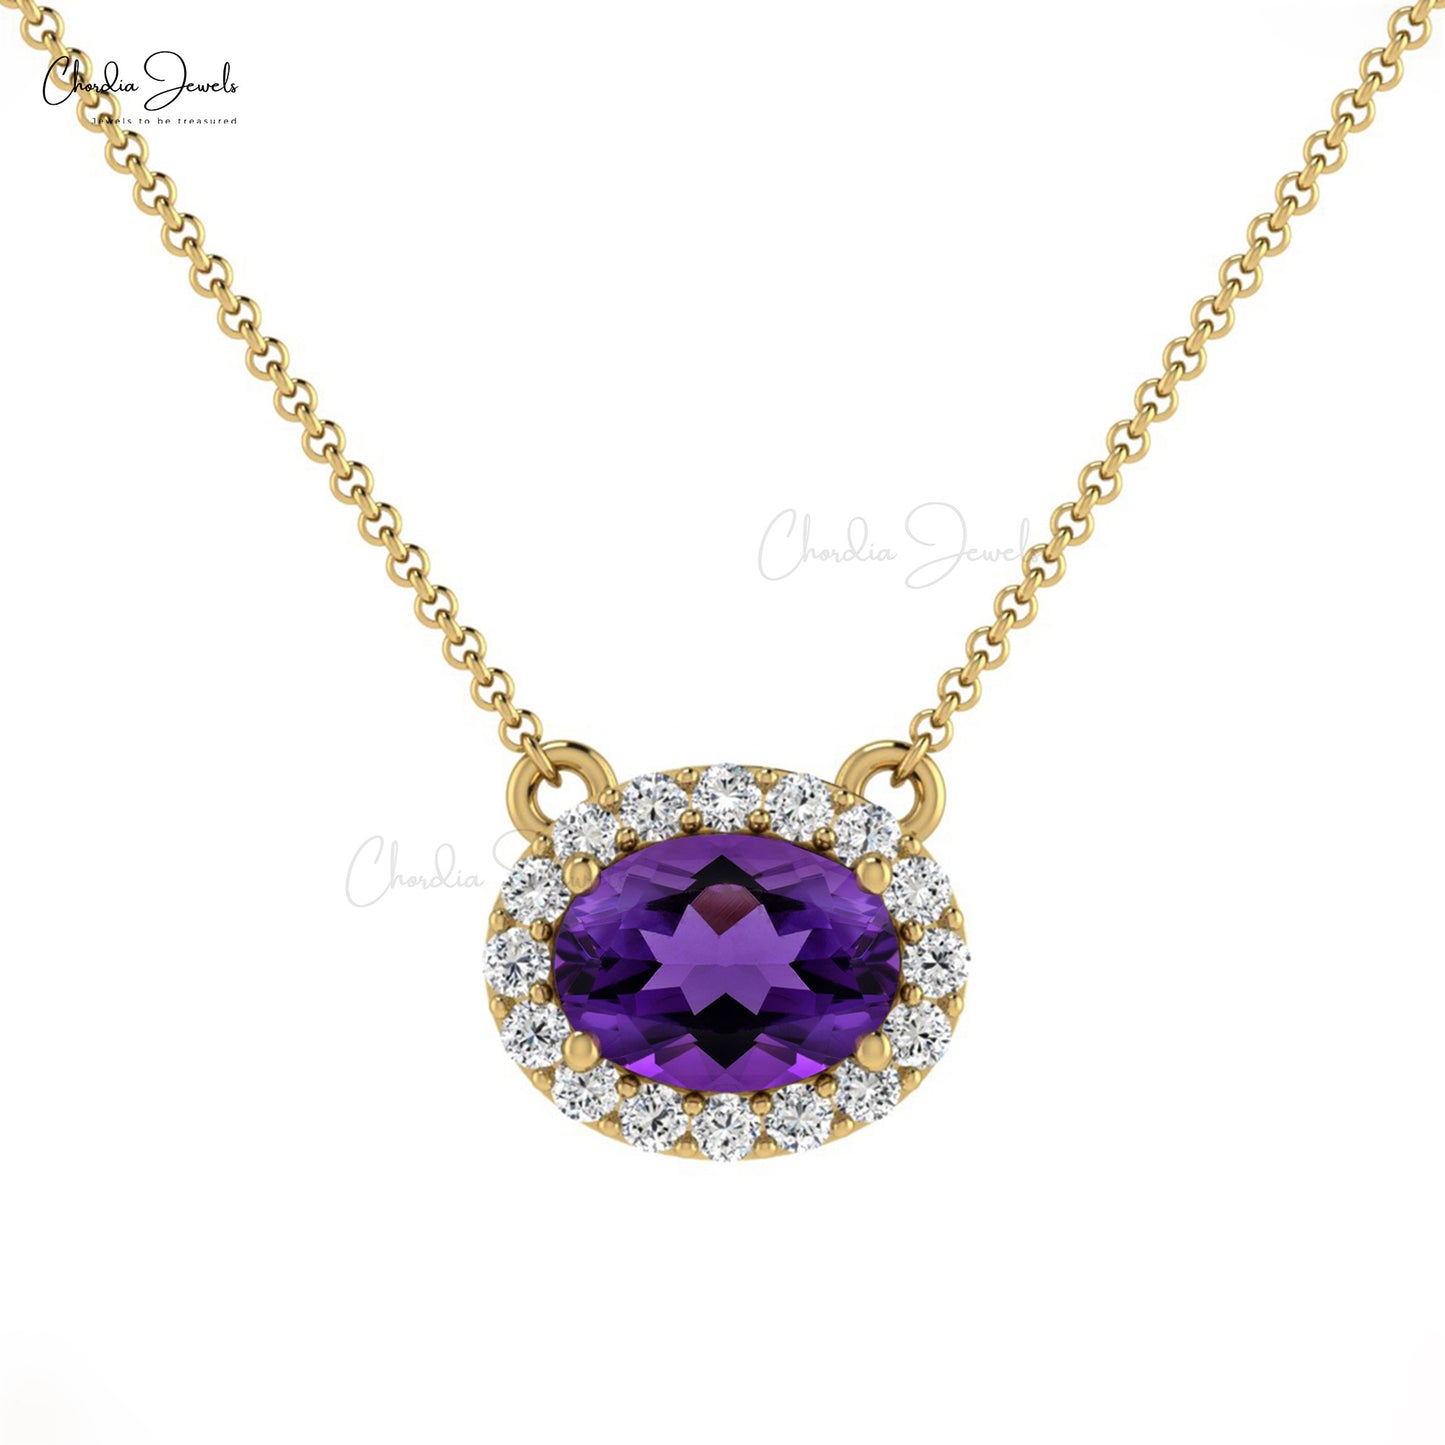 7x5mm Oval Shaped Amethyst Diamond Halo Necklace in 14K Gold